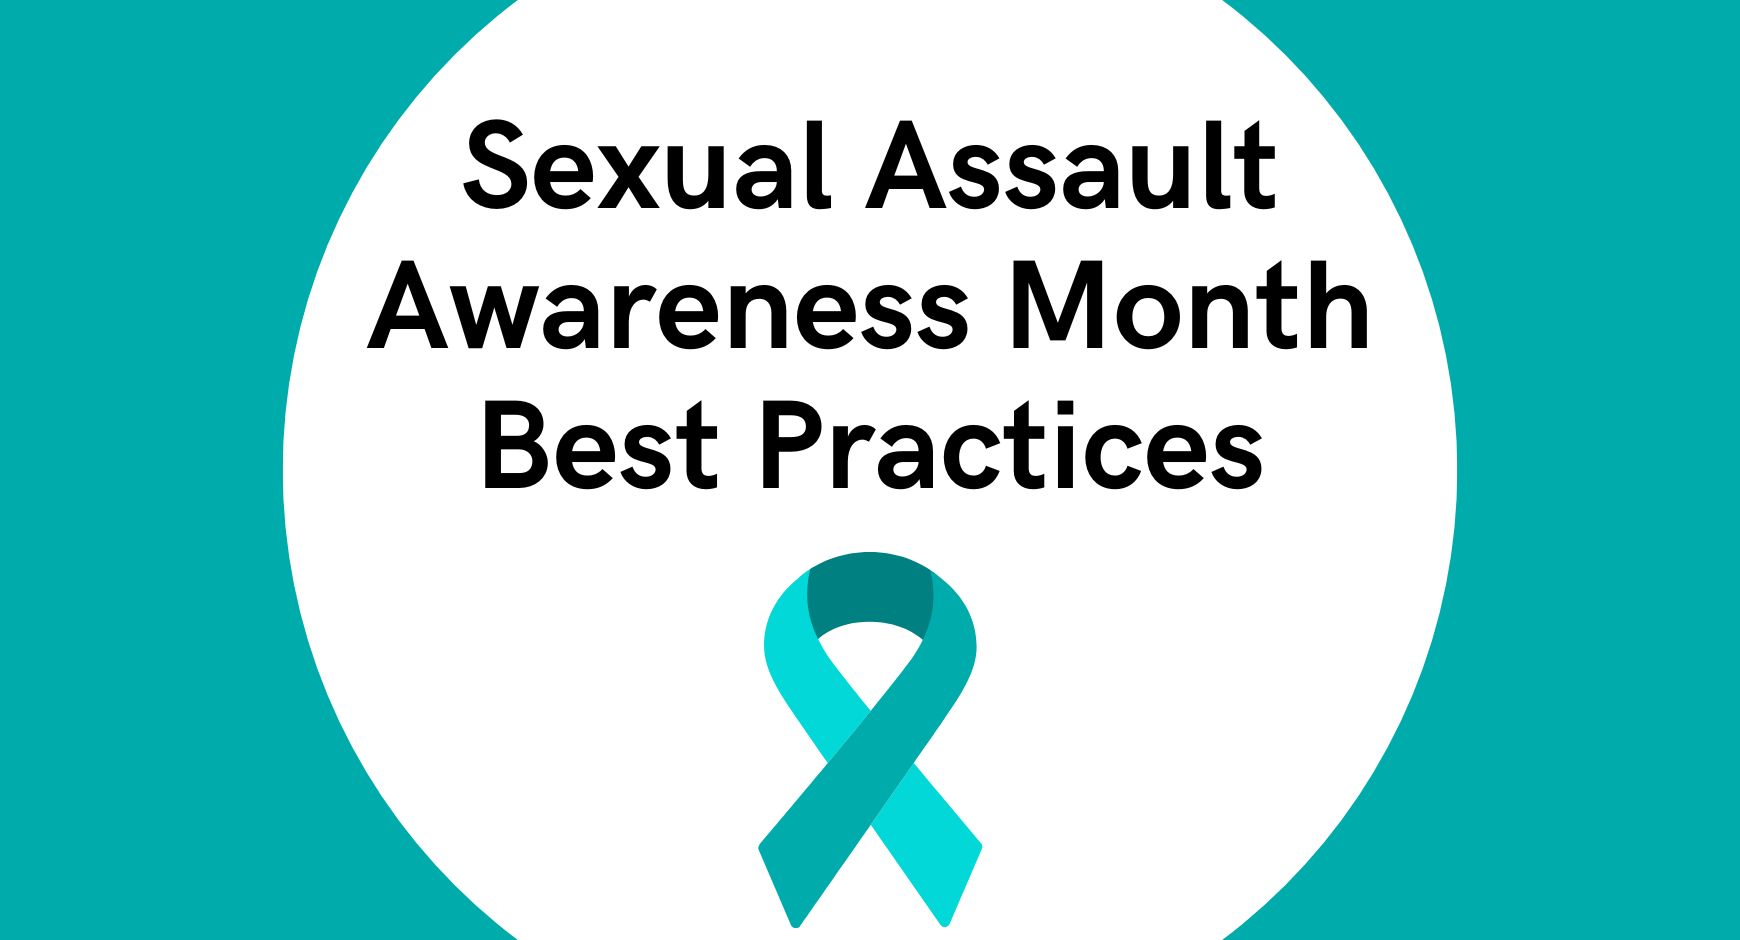 Words that read "Sexual Assault Awareness Month Best Practices" over a teal ribbon.